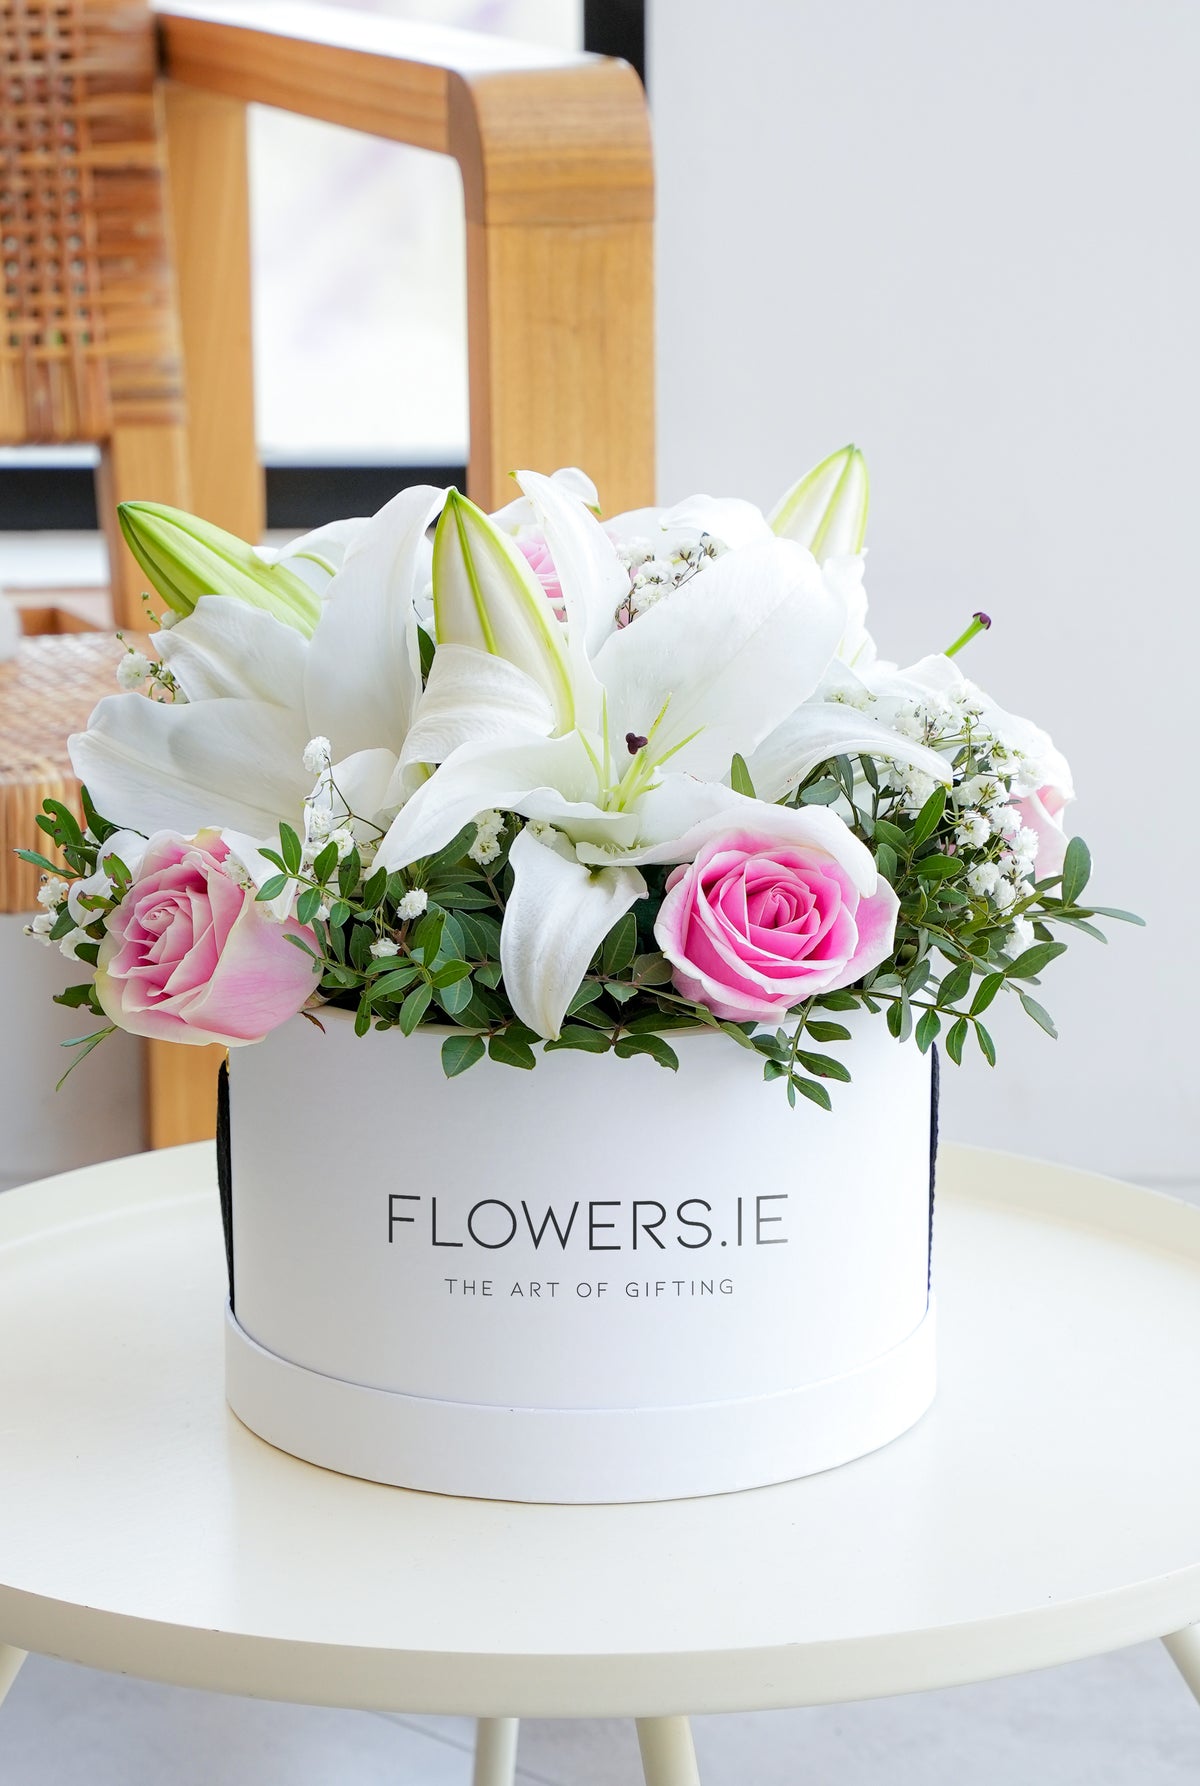 Pink Roses and White Lily - Hatbox